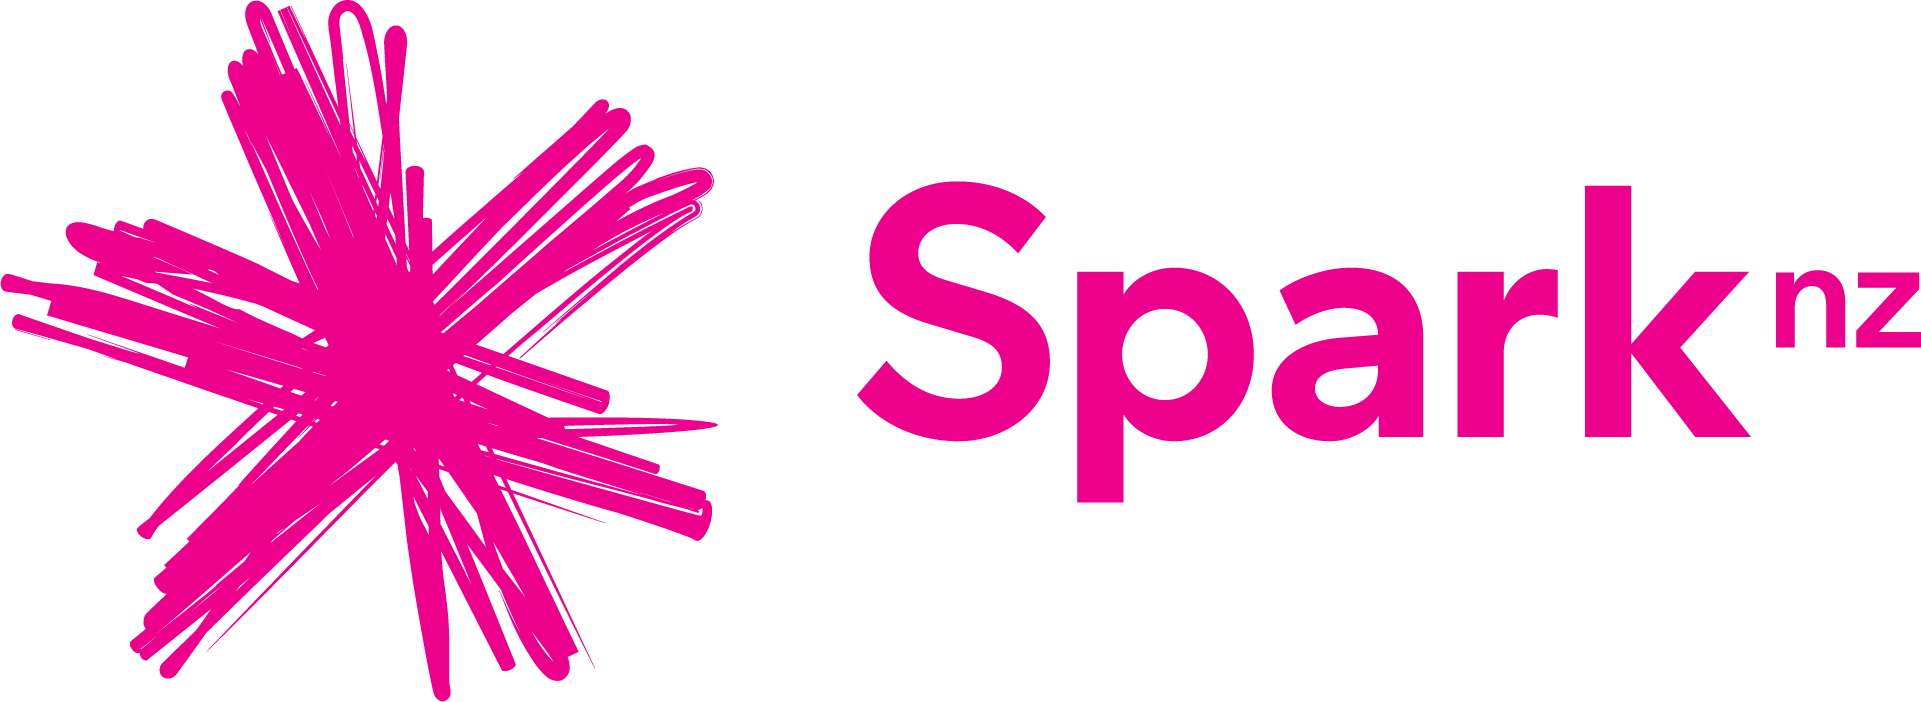 This event is supported by the Pride & Spark Empowerment Initiative  Logo